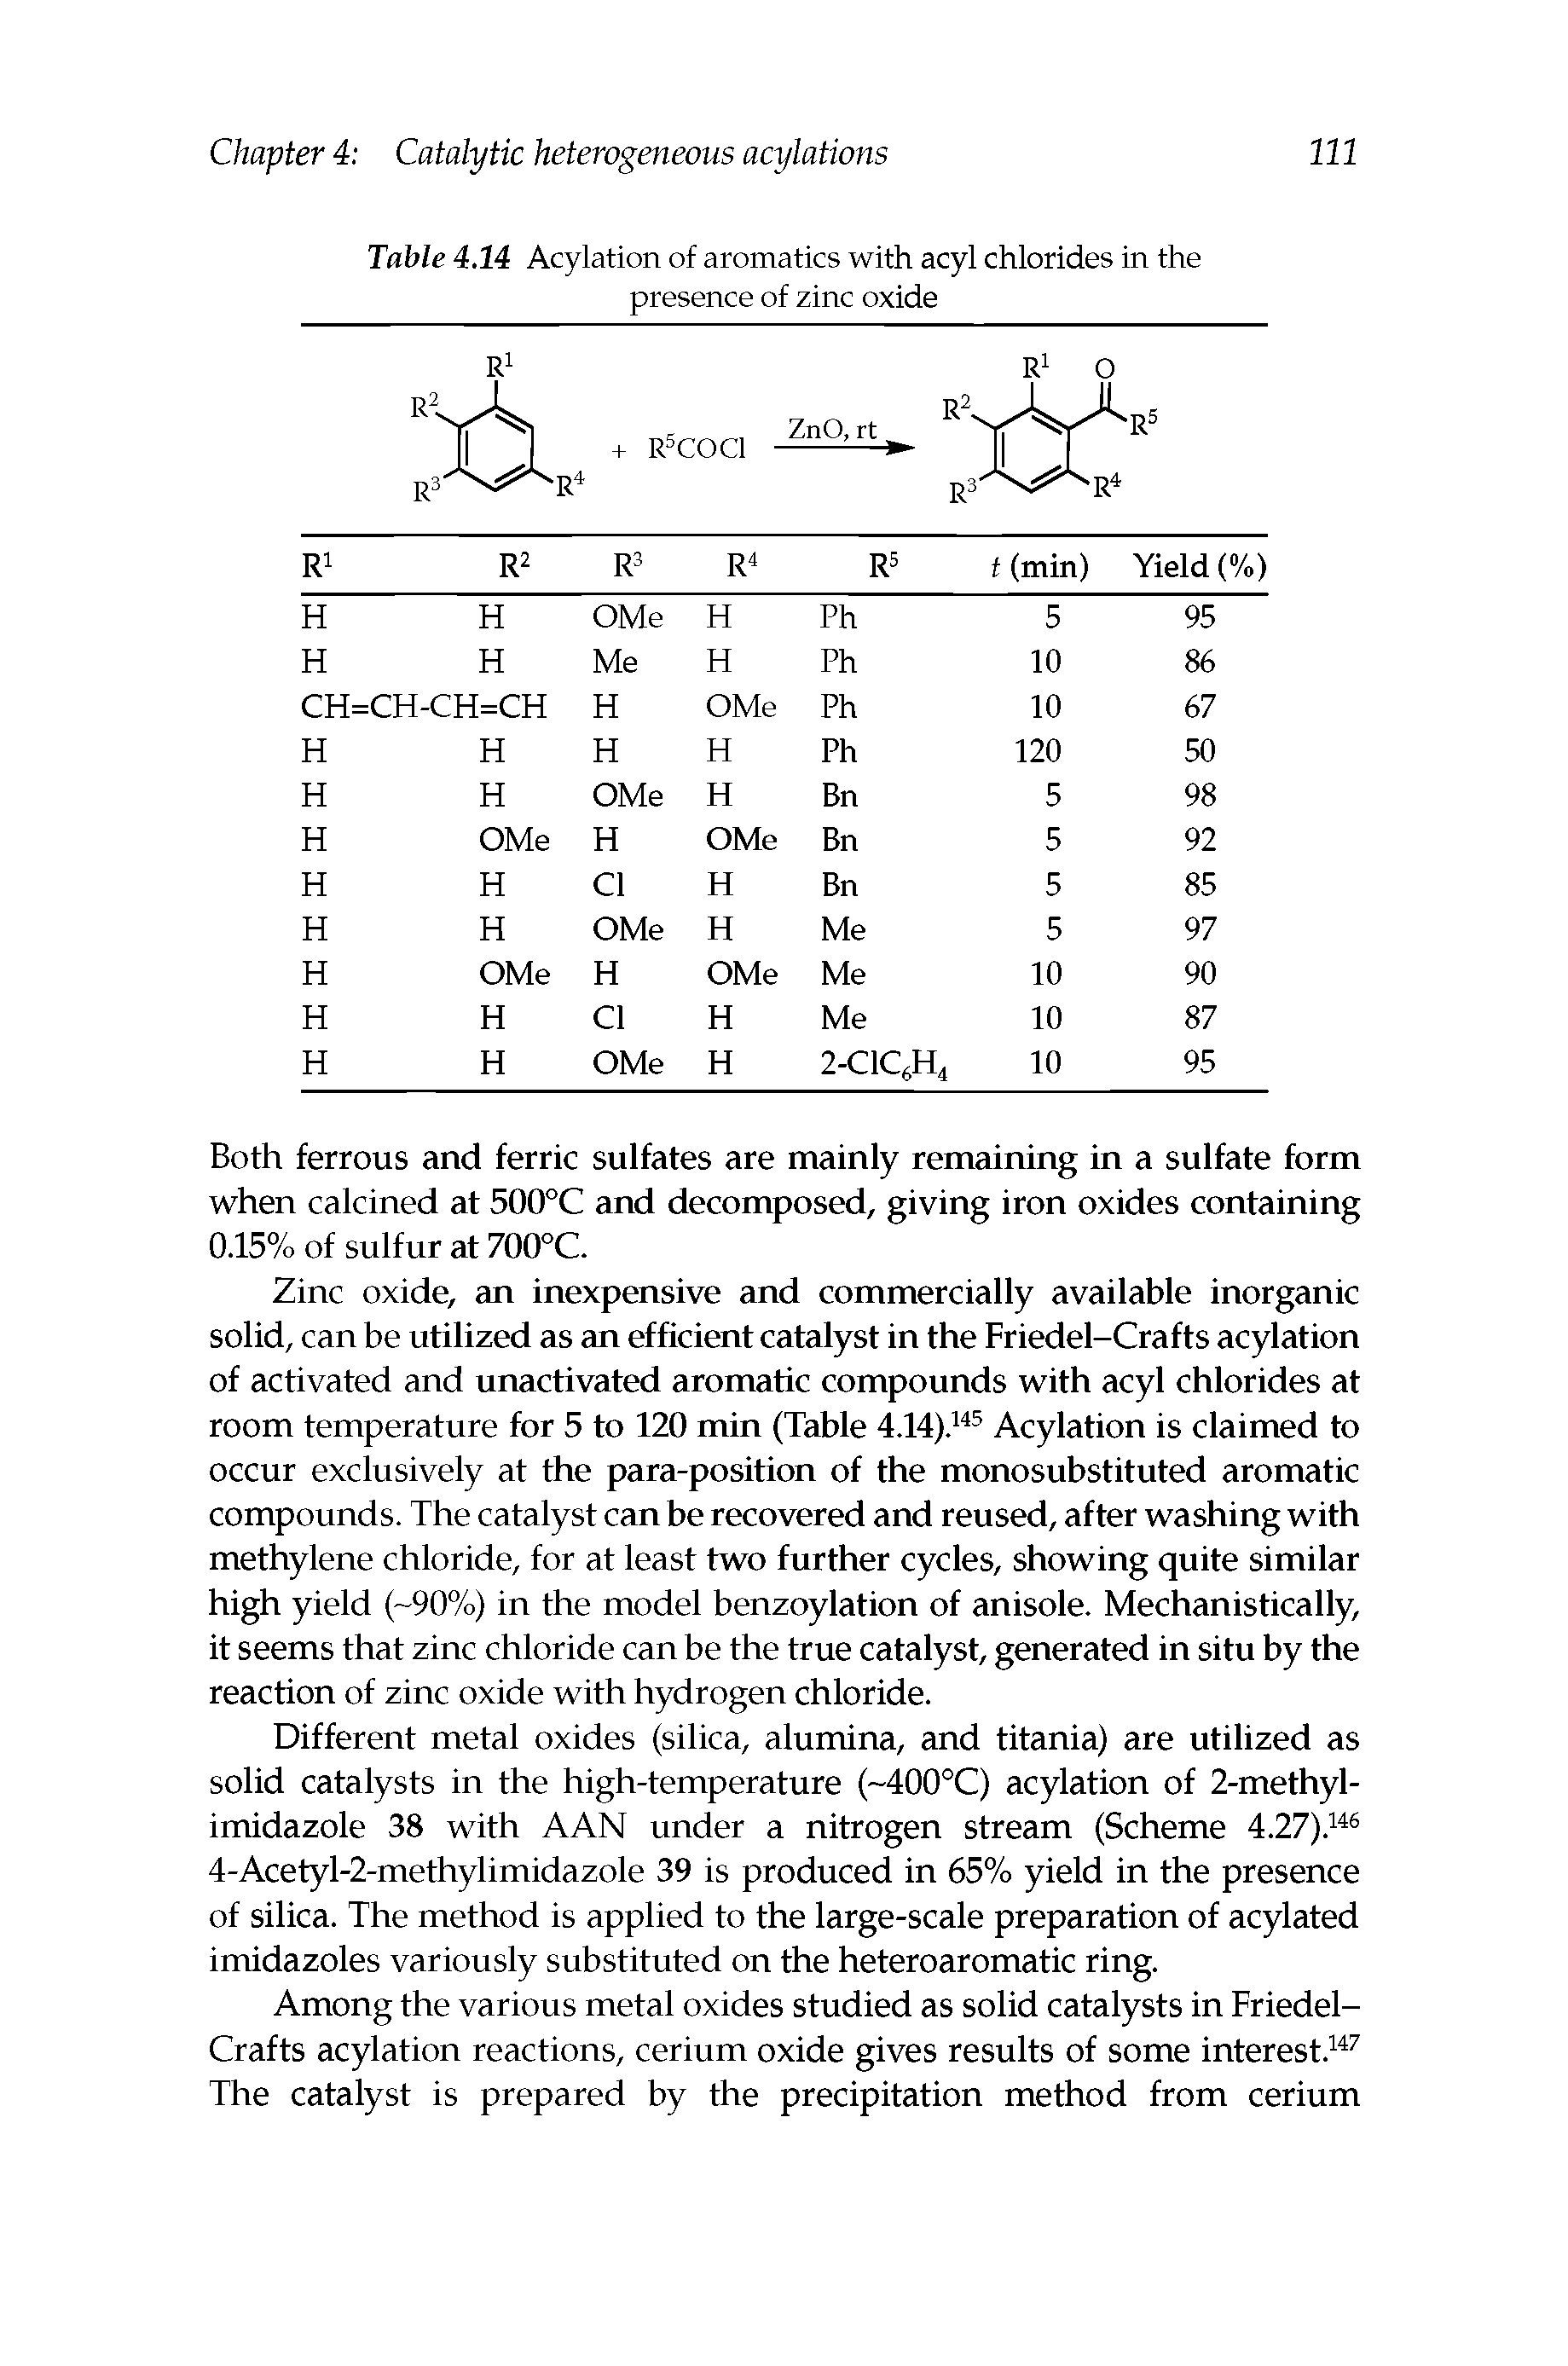 Table 4.14 Acylation of aromatics with acyl chlorides in the presence of zinc oxide...